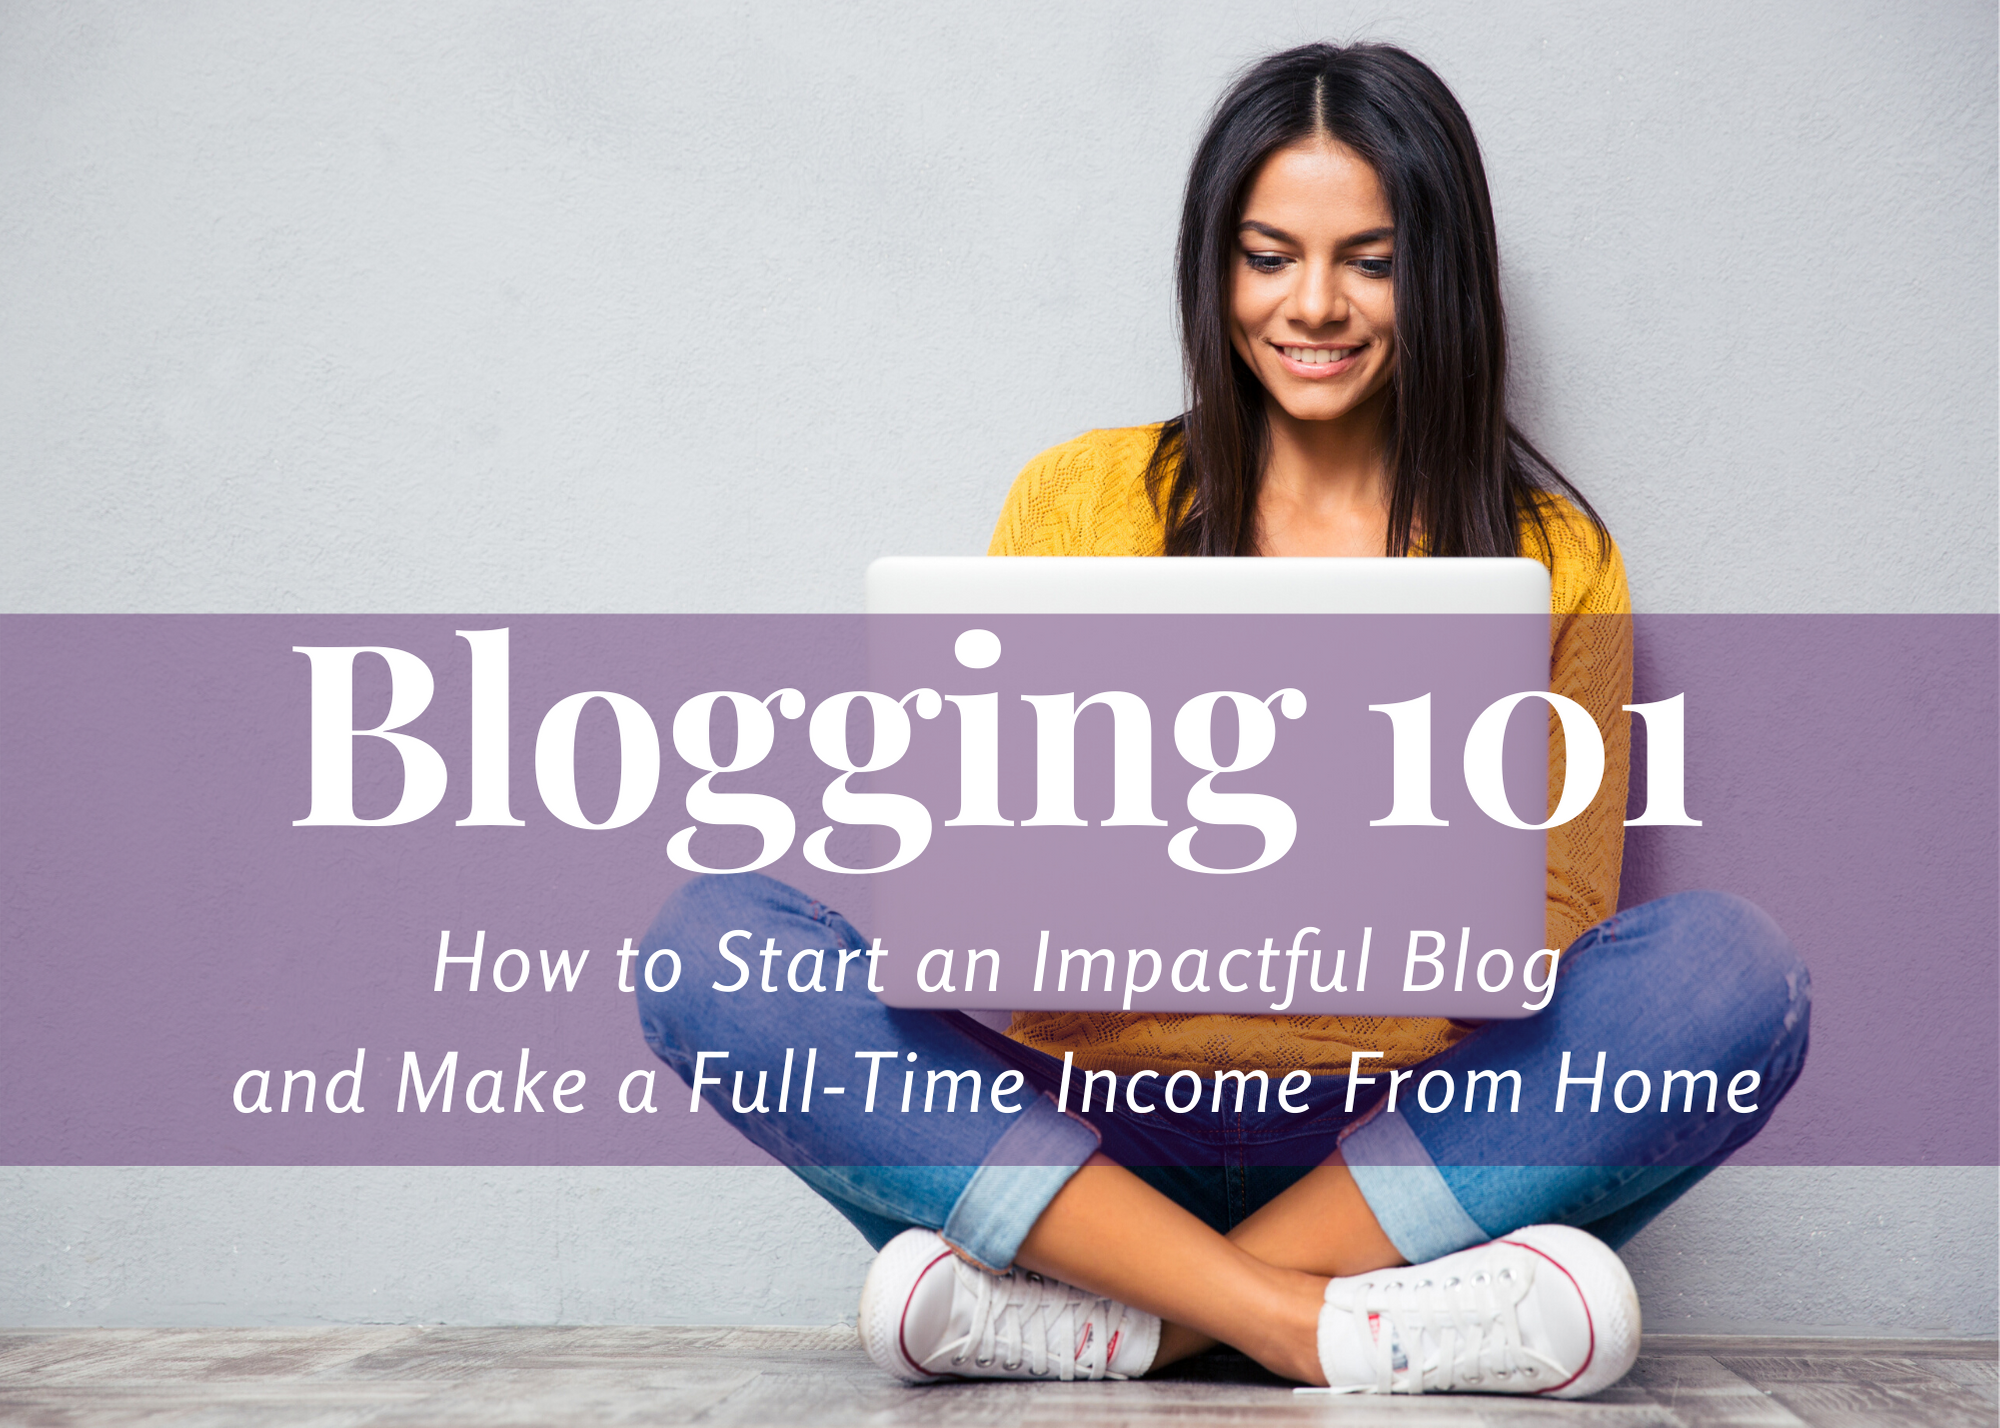 Blogging 101 ~ How to Start an “Impactful” Blog and Make a Full-Time Income From Home